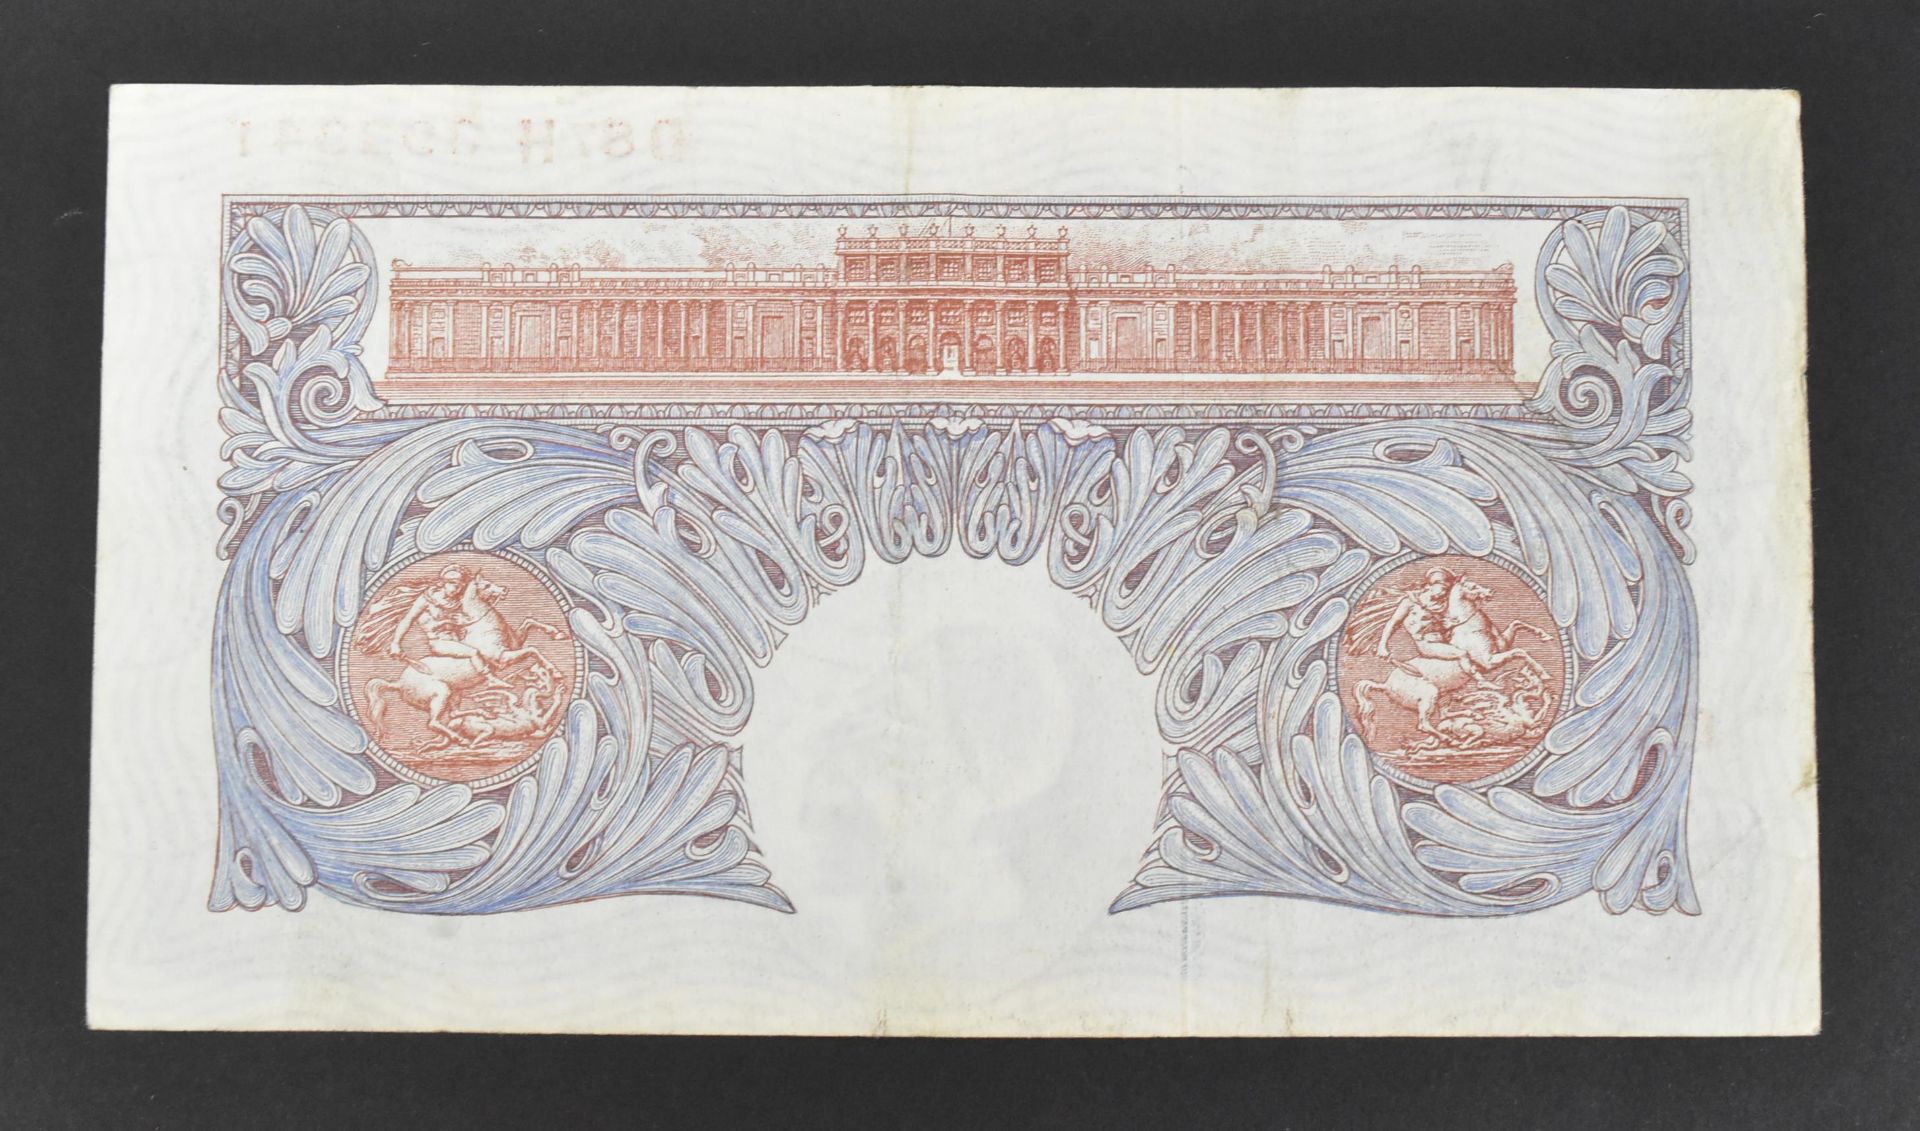 COLLECTION BRITISH UNCIRCULATED BANK NOTES - Image 39 of 61